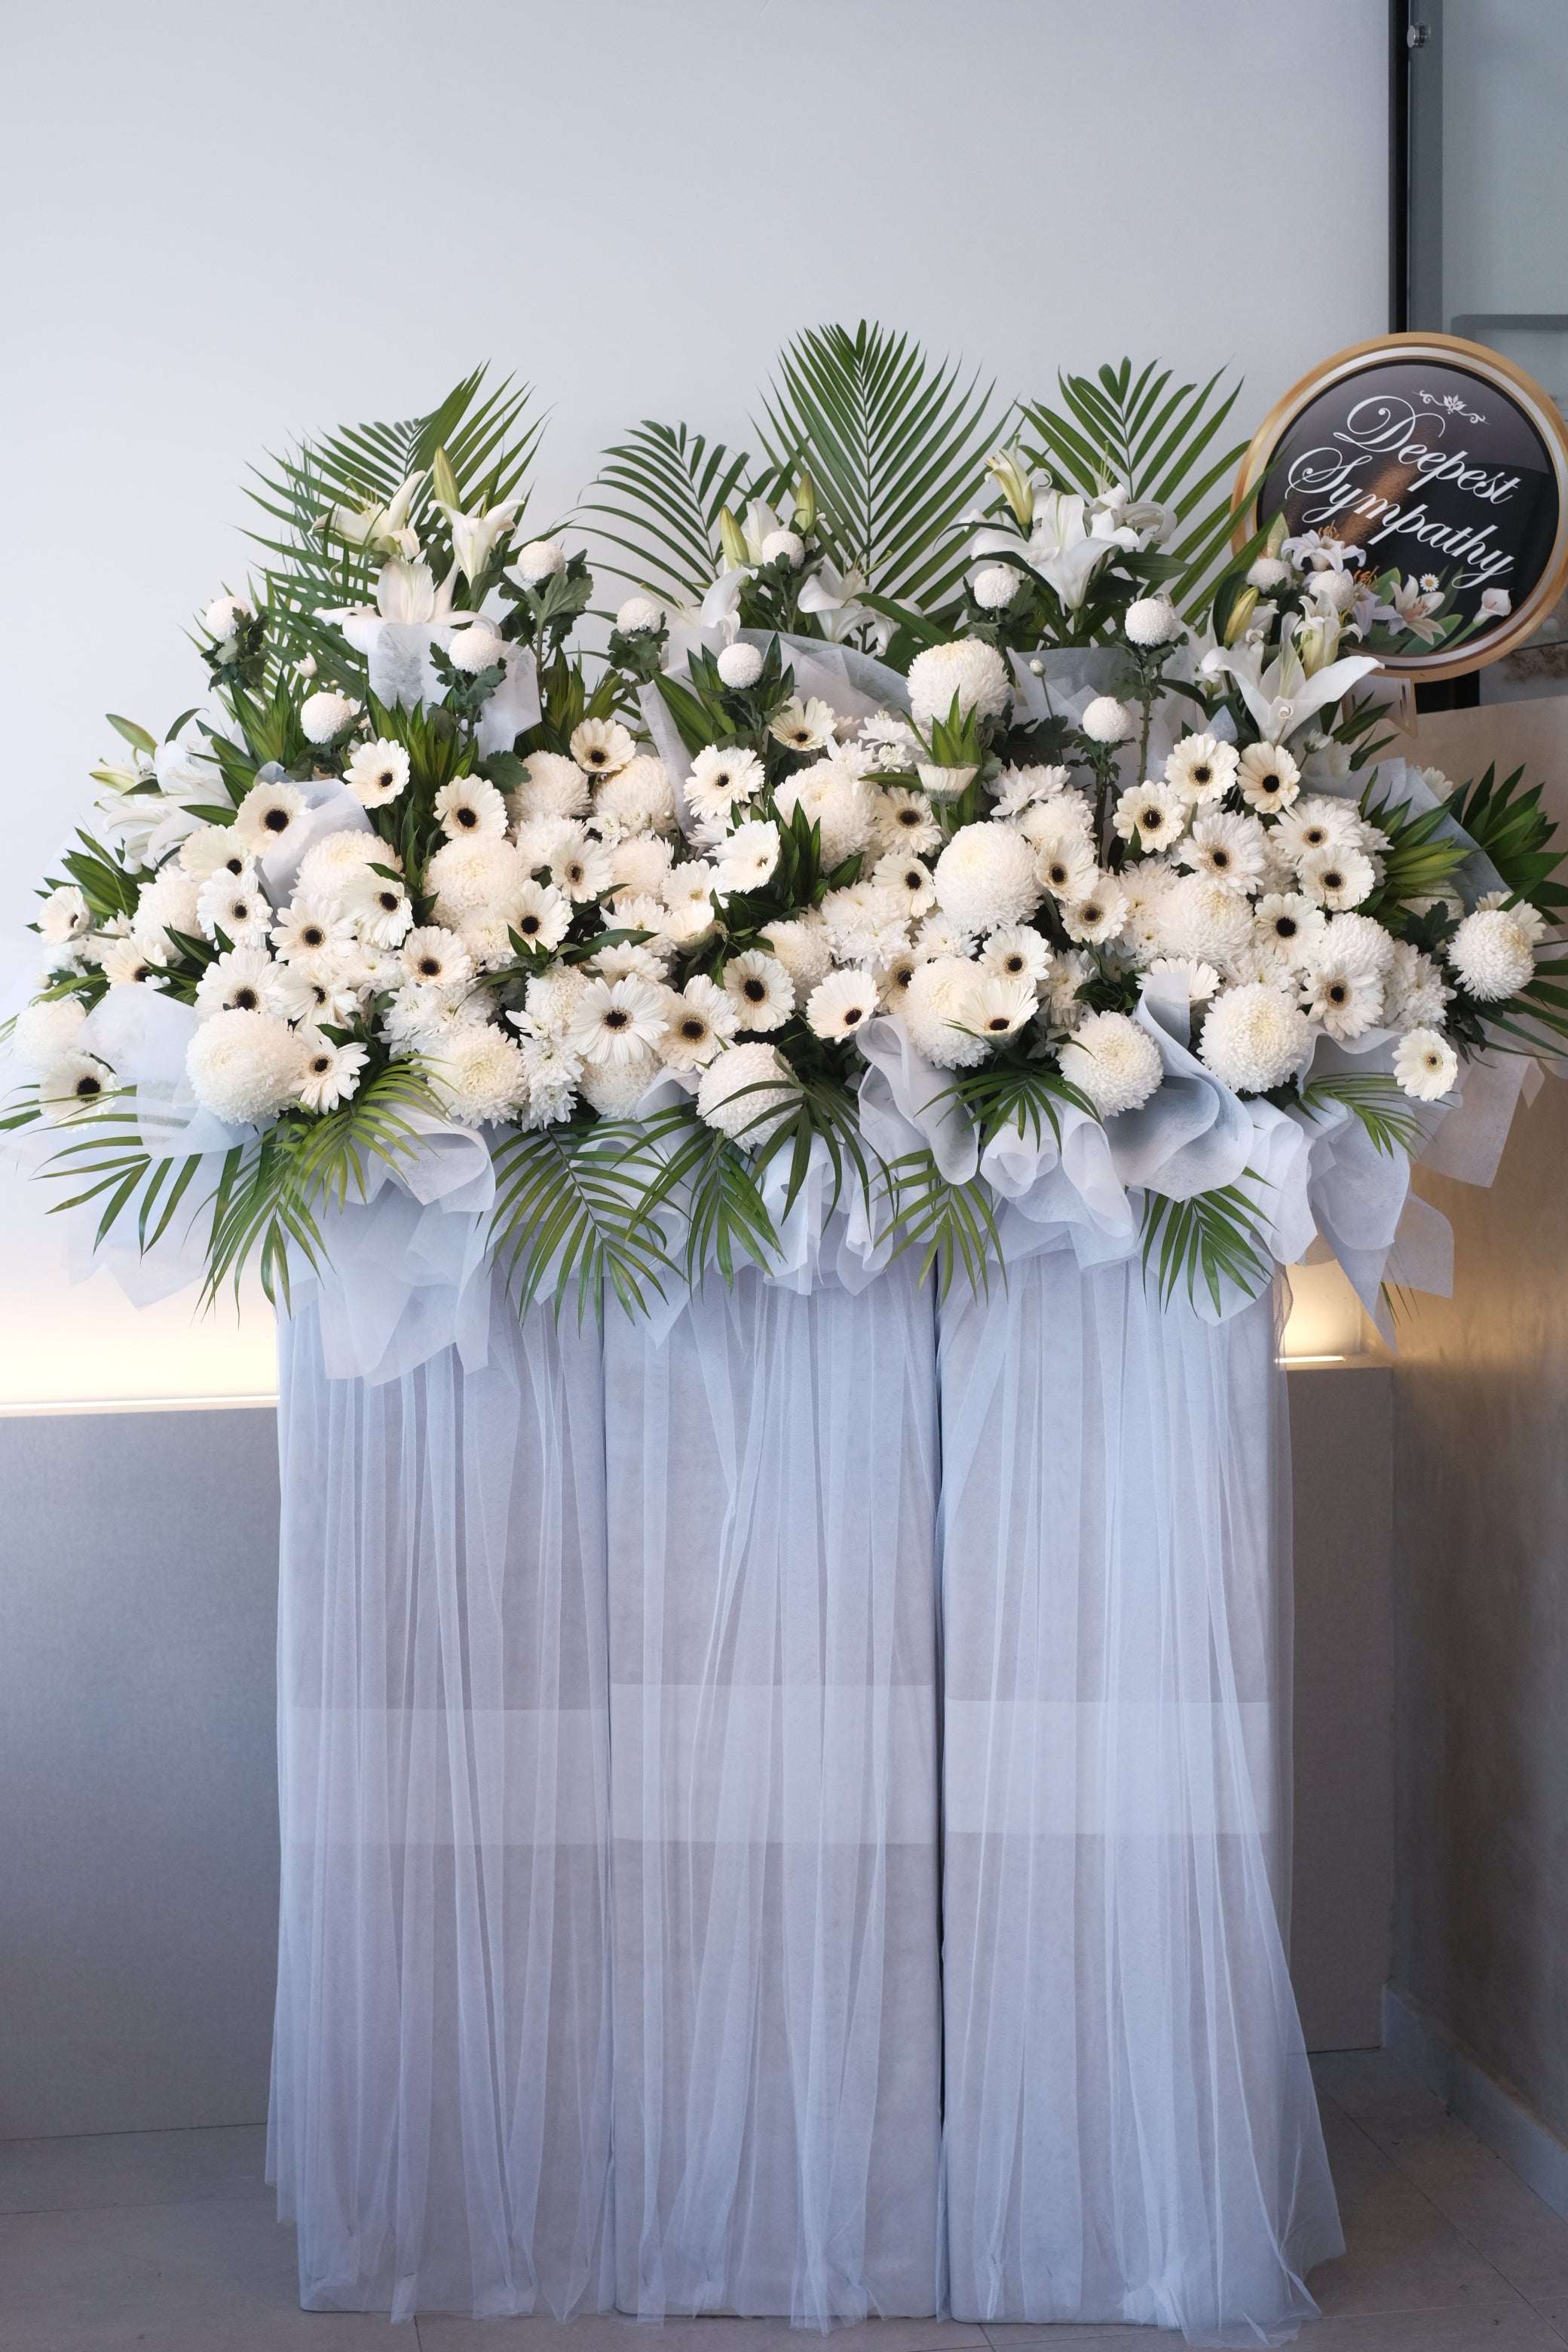 funeral stand flowers with white chrysanthemum, condolences message on wreath, in loving memory with white wrapping